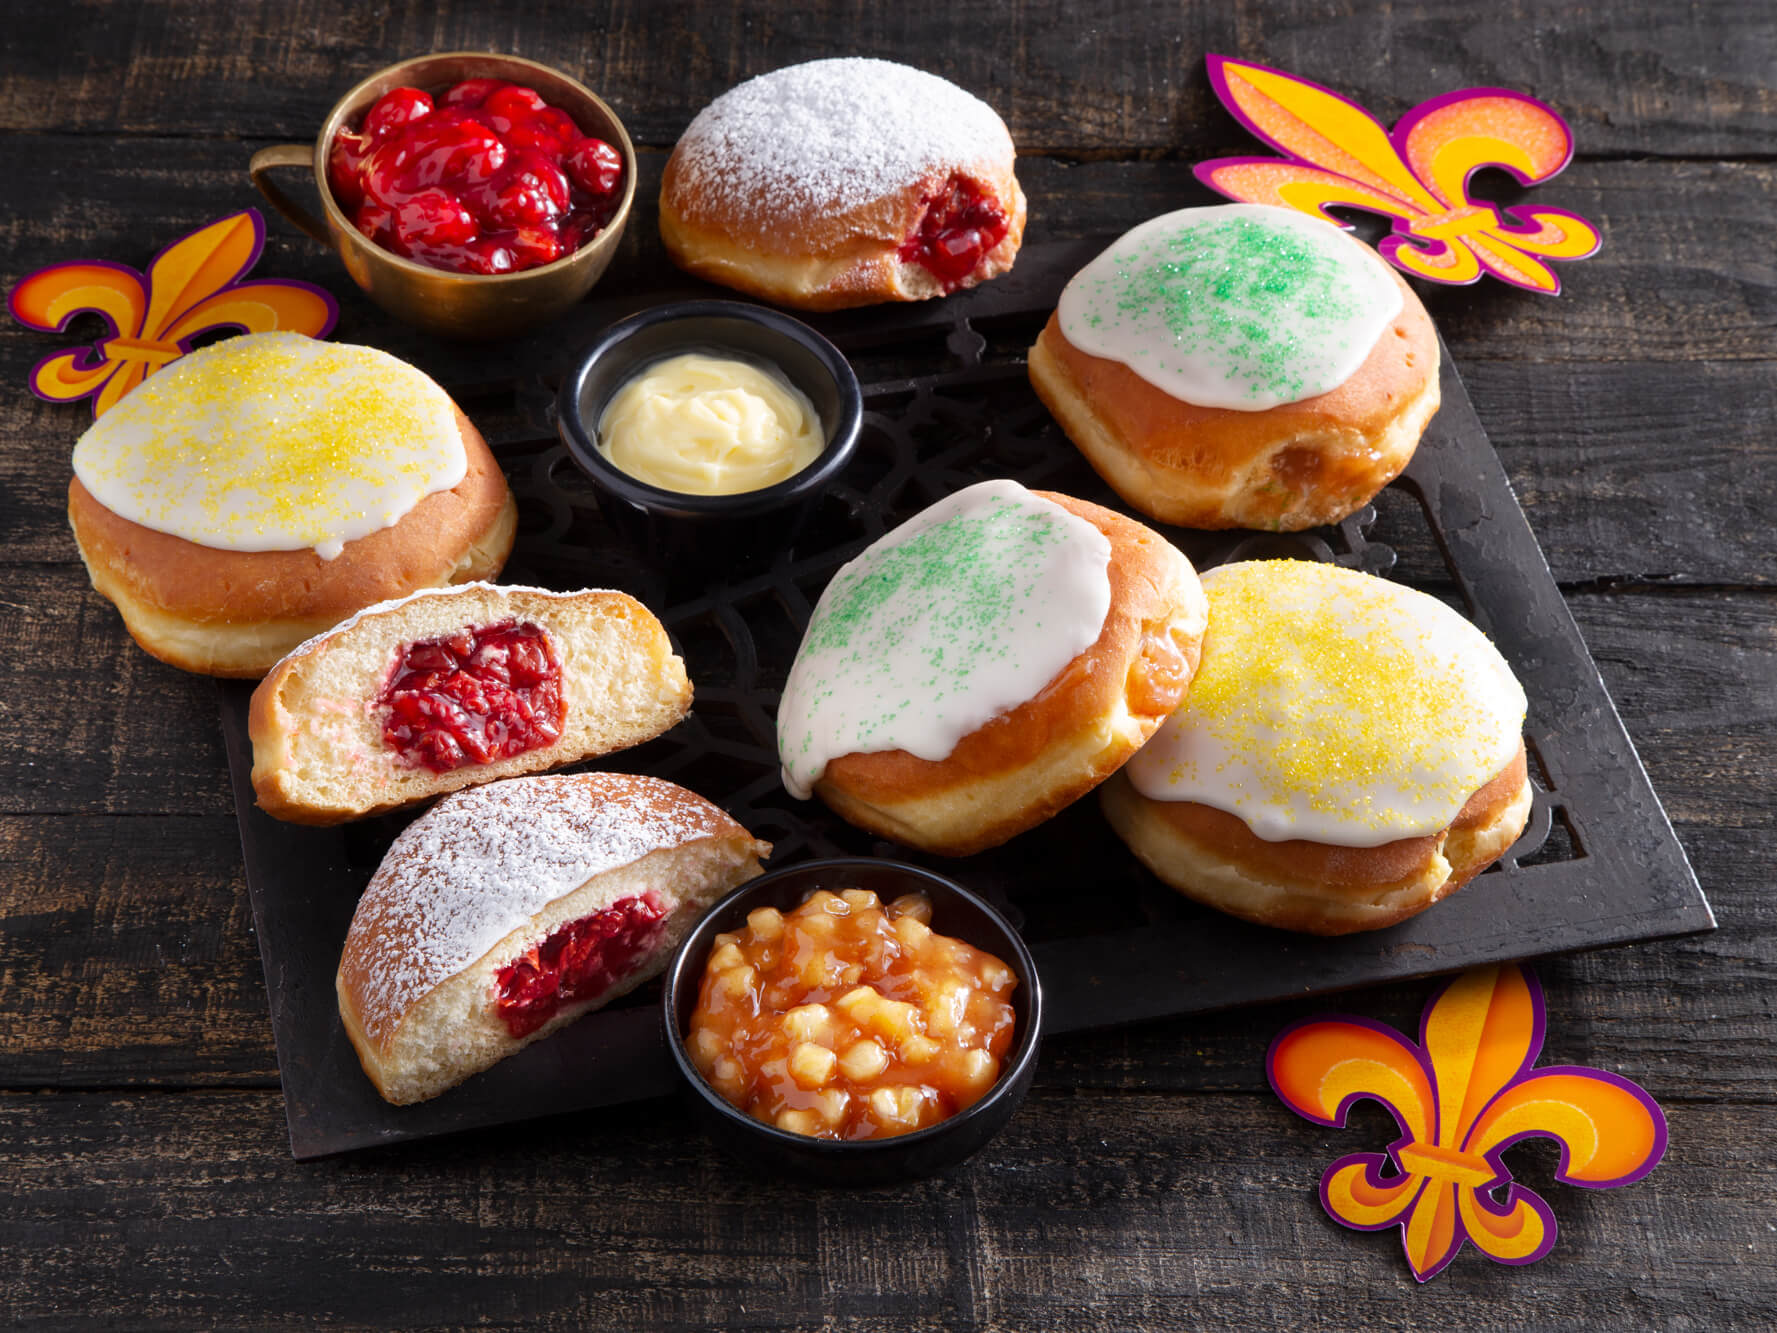 Paczki Packages for Mardi Gras